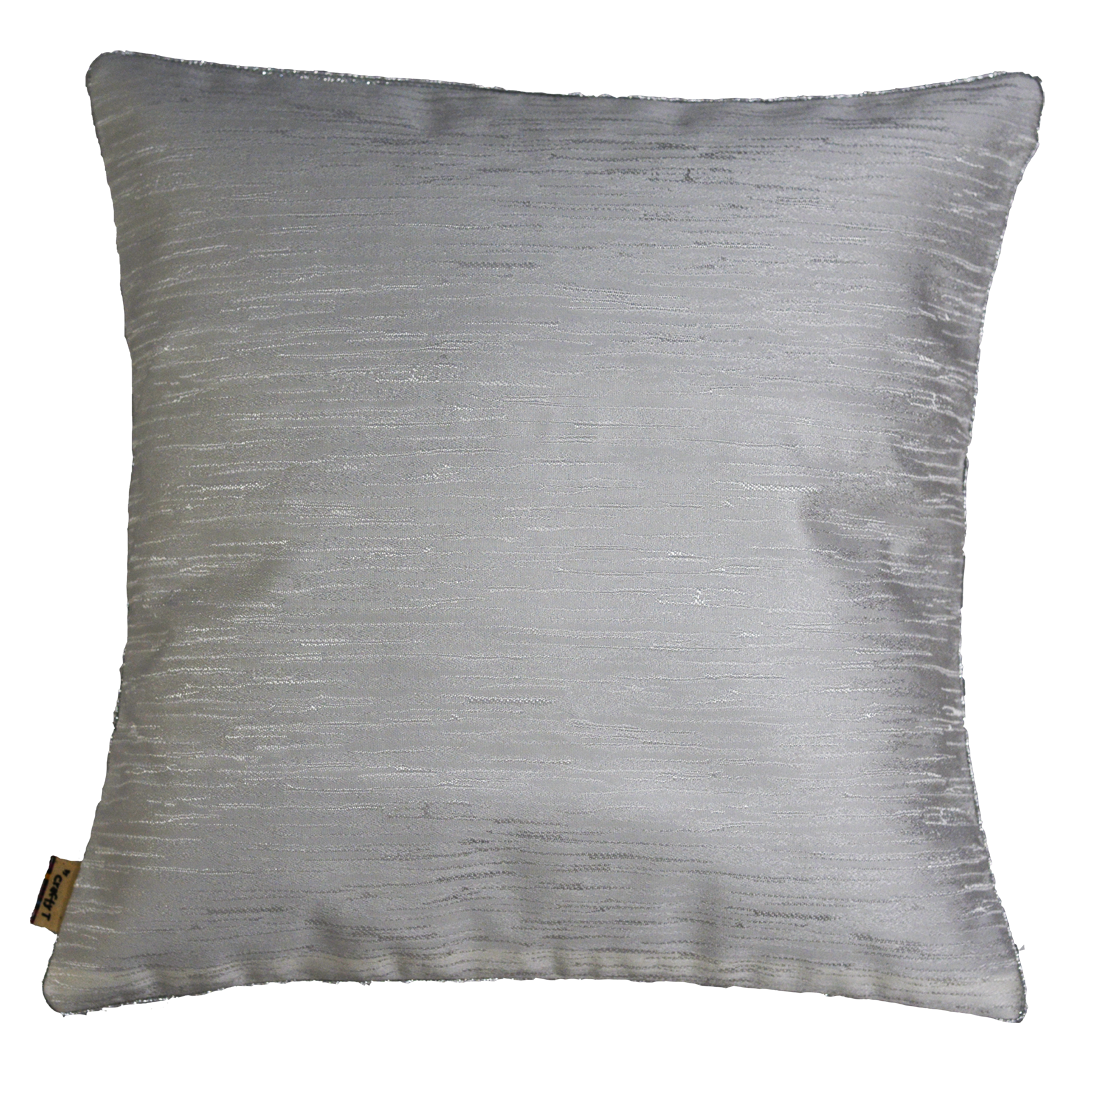 Textured white cushion cover with sparkly silver piping - Harlan House & Home